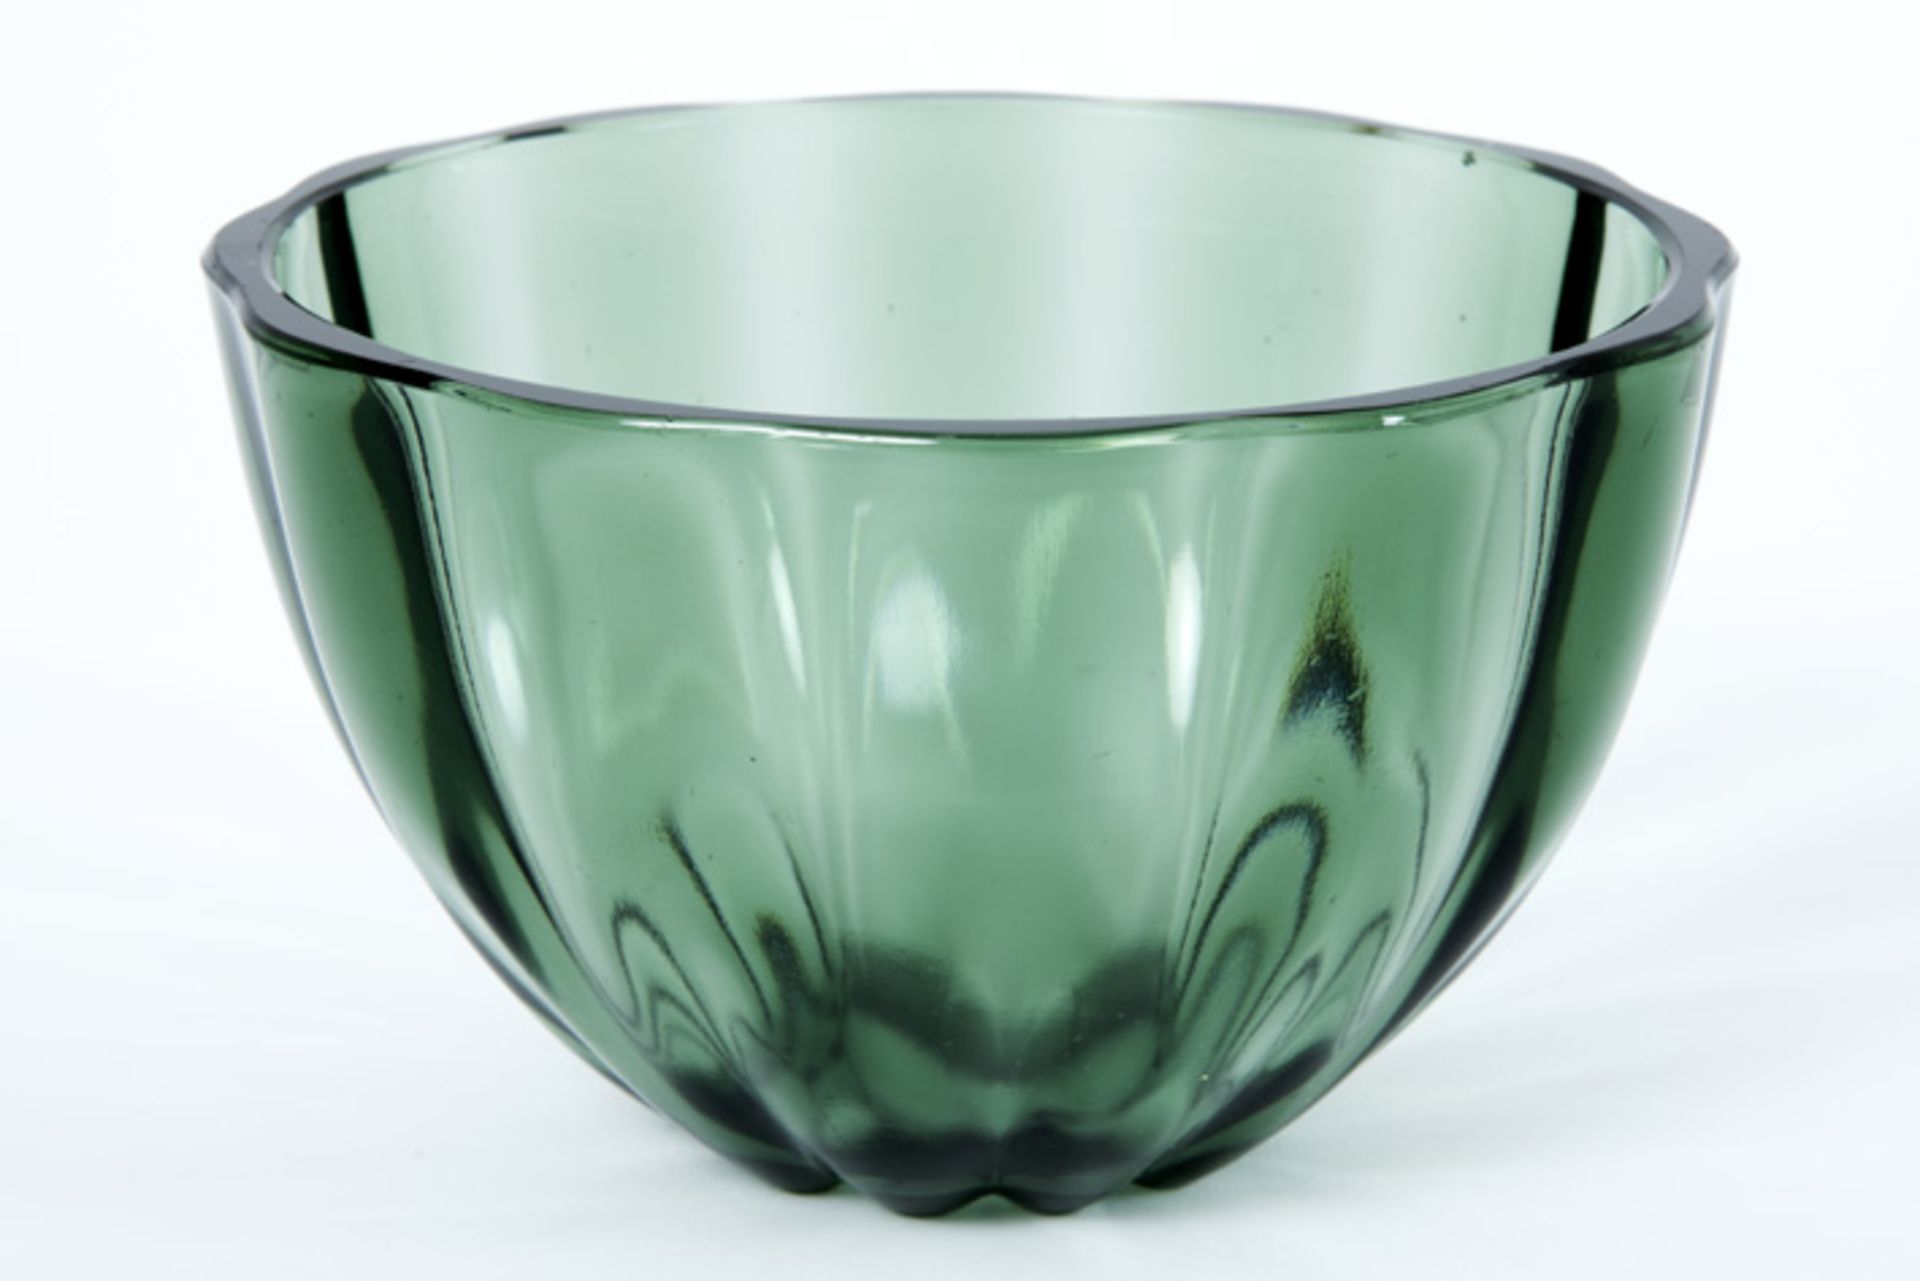 thirties' Wilhelm Wagenfeld bowl in turmaline glass - marked with the typical X in a hexagone||